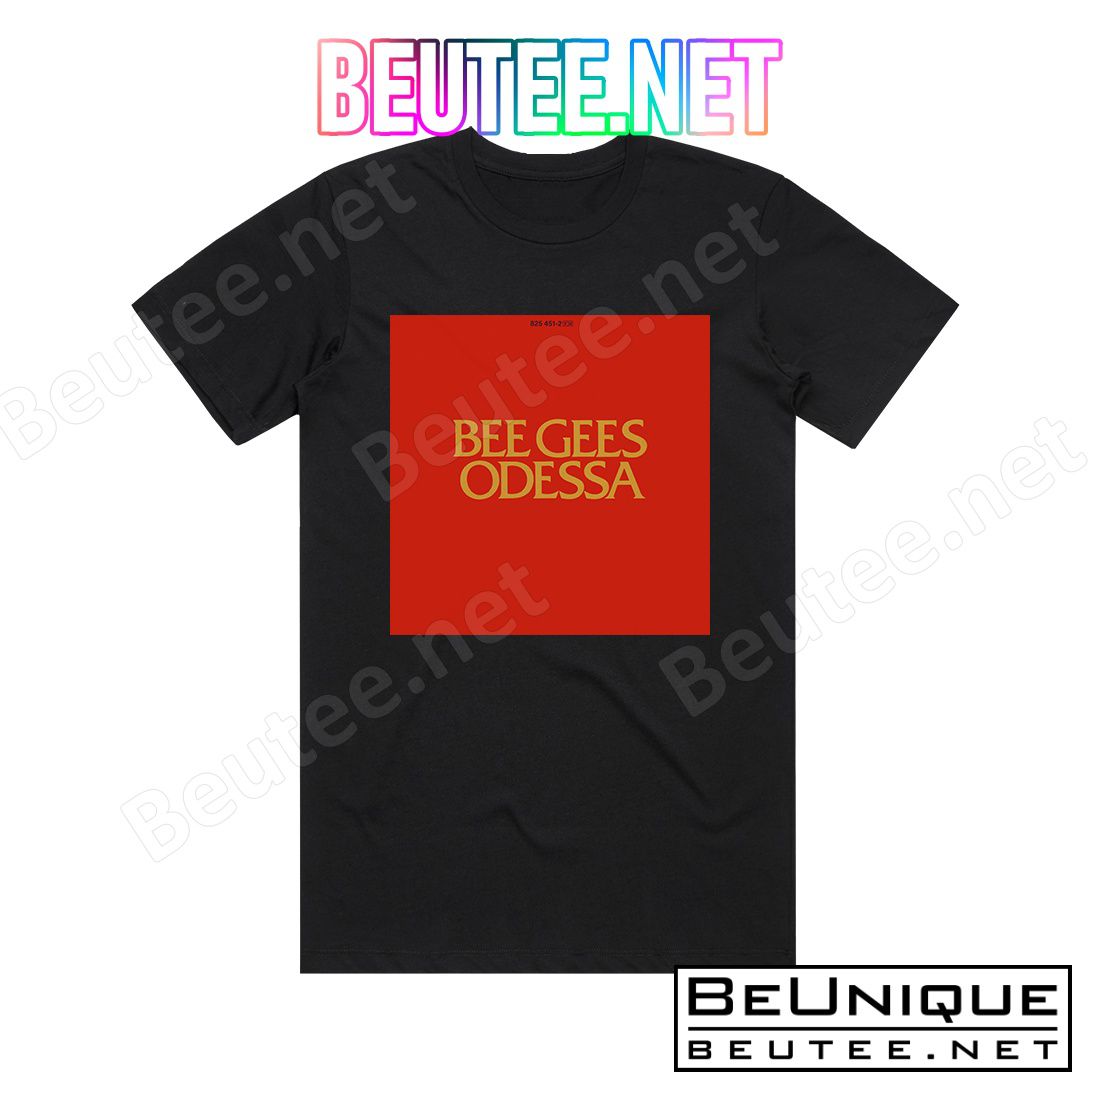 Bee Gees Odessa Album Cover T-Shirt